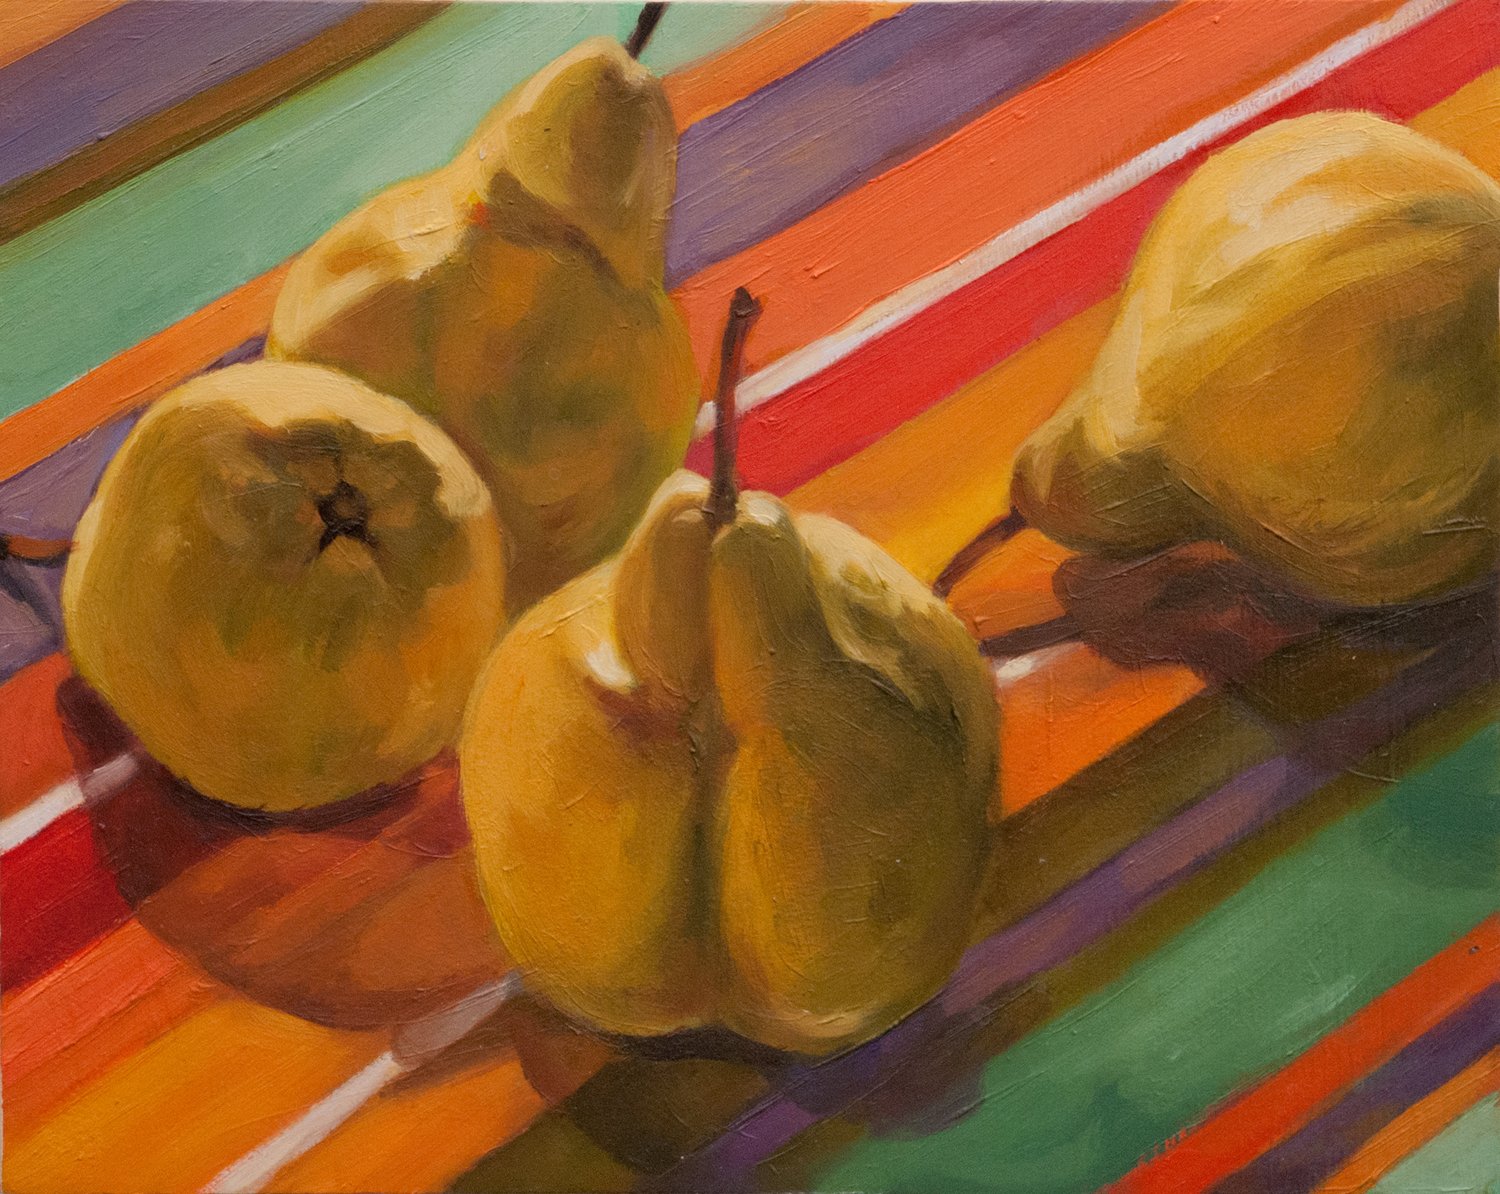 Pears and Stripes #1 